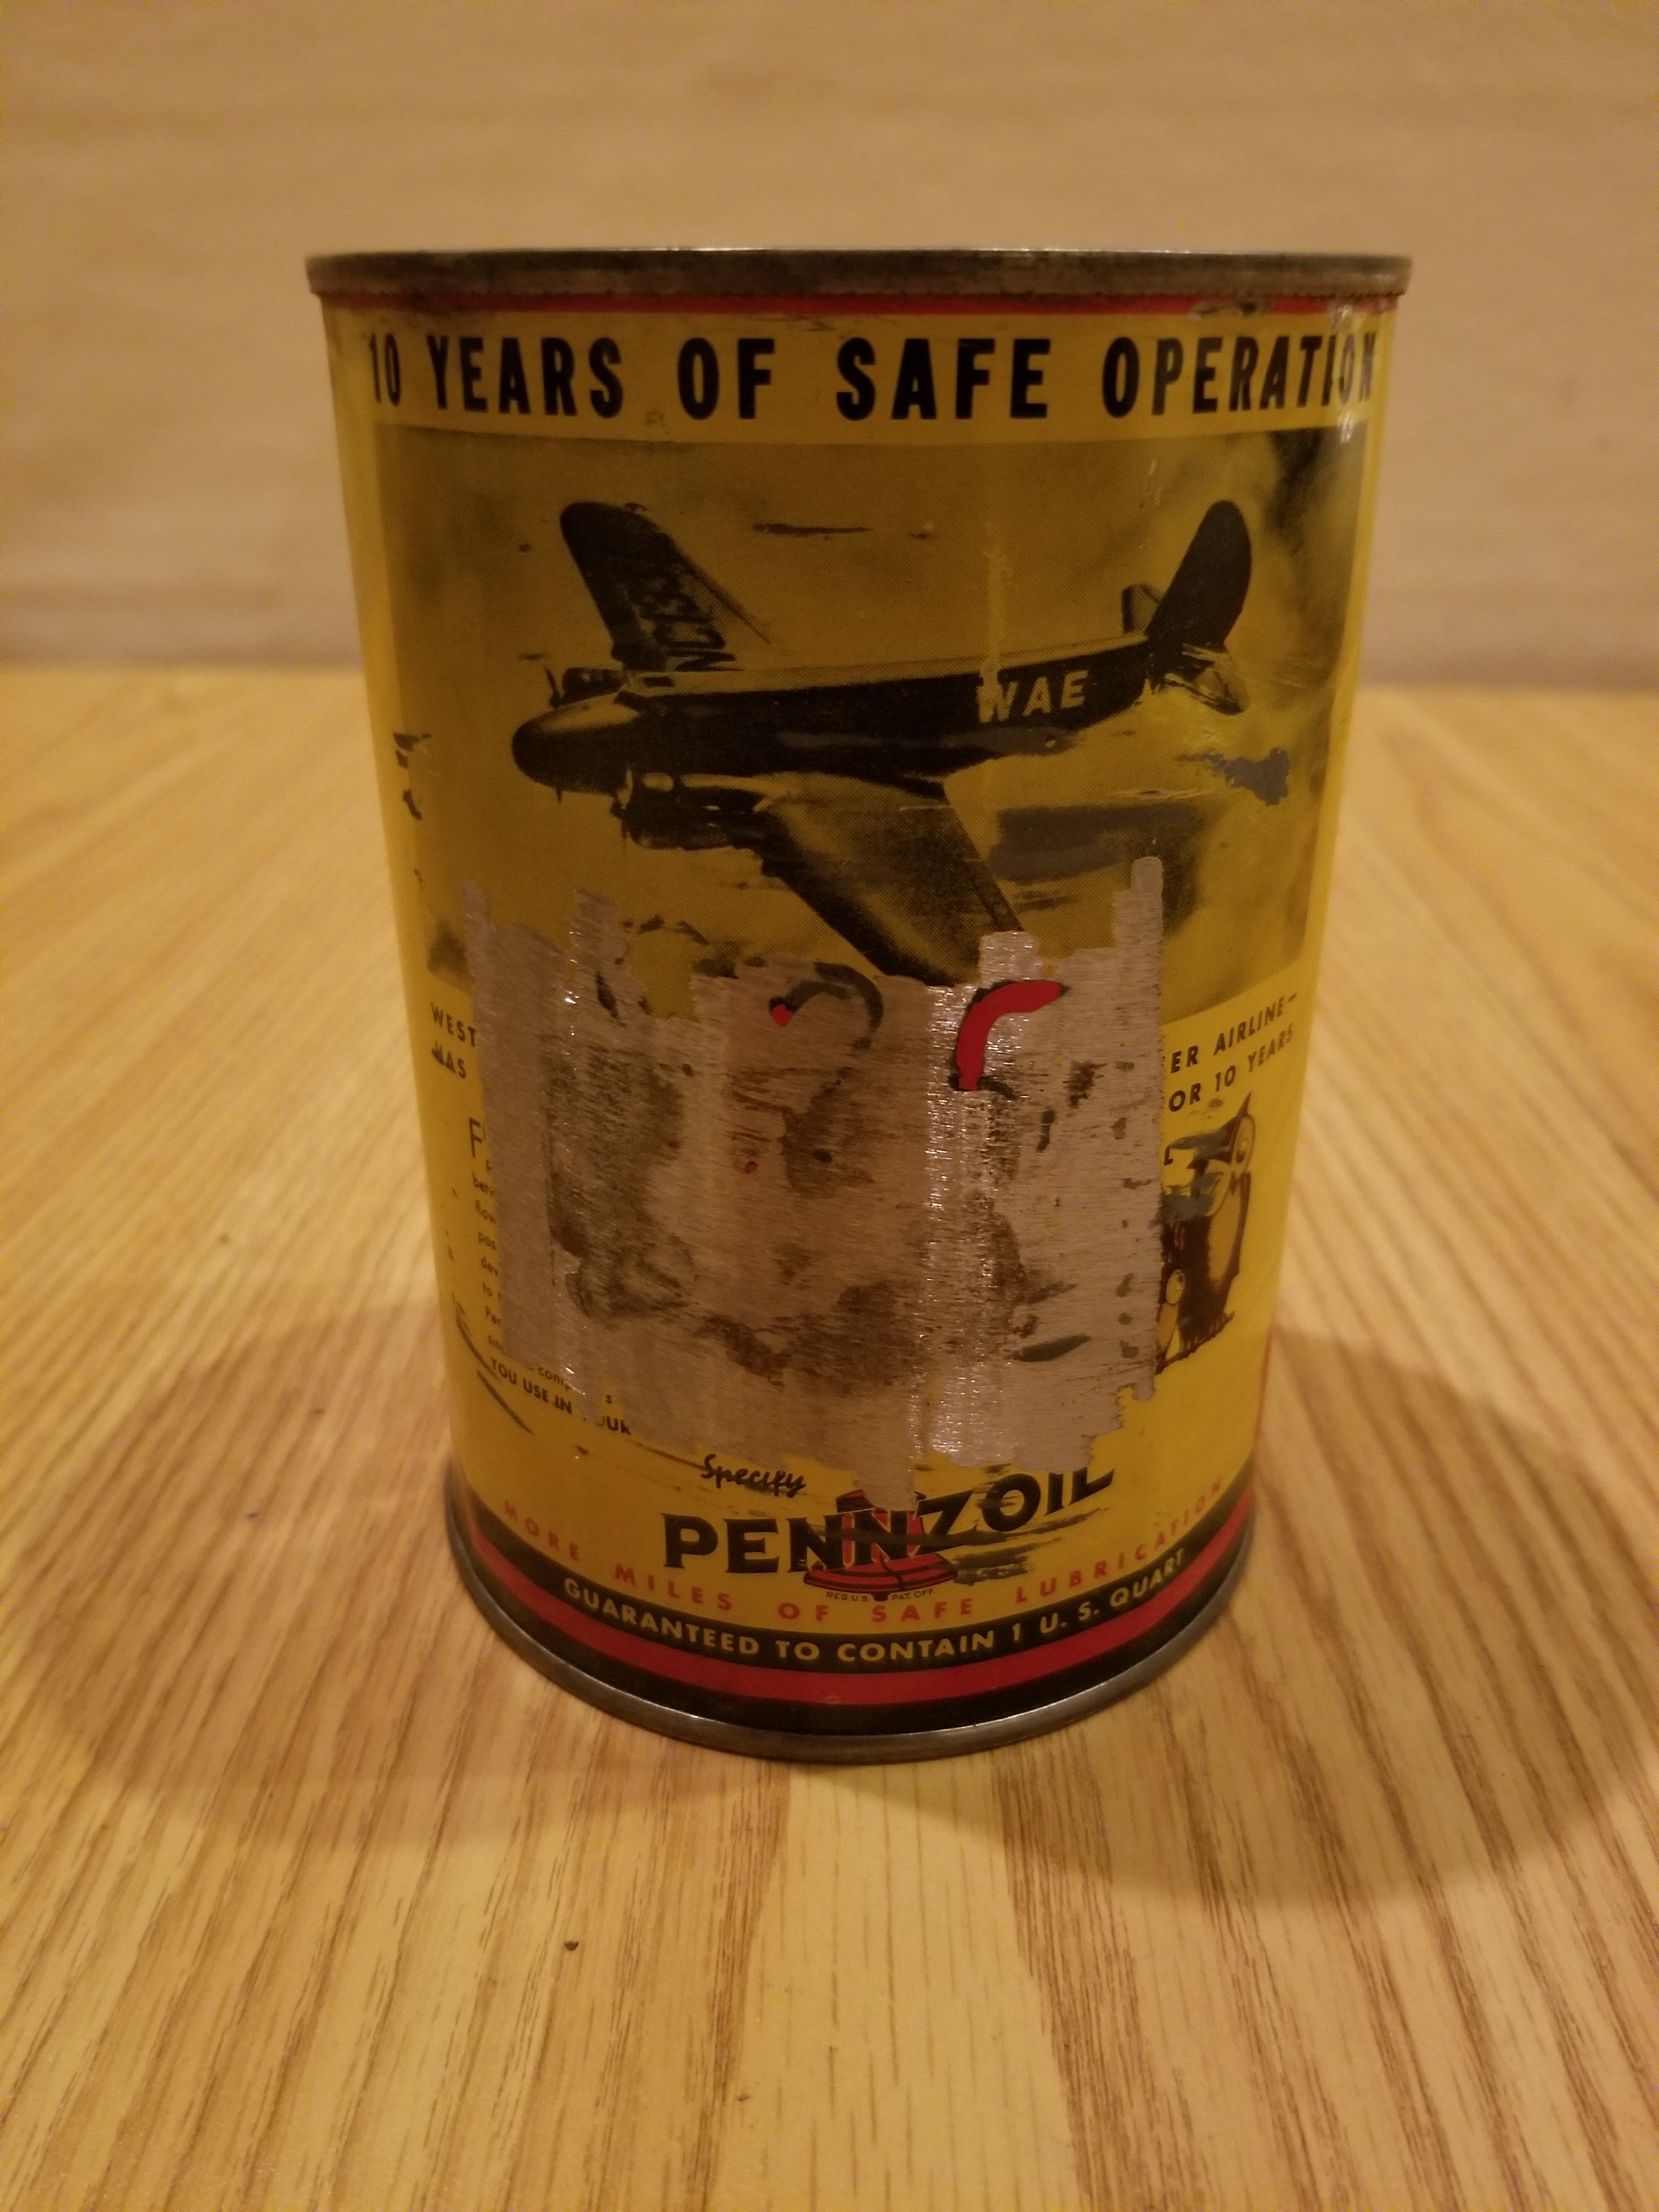 Pennzoil 10 Years Safe Operation Airplane Picture Motor Oil Can